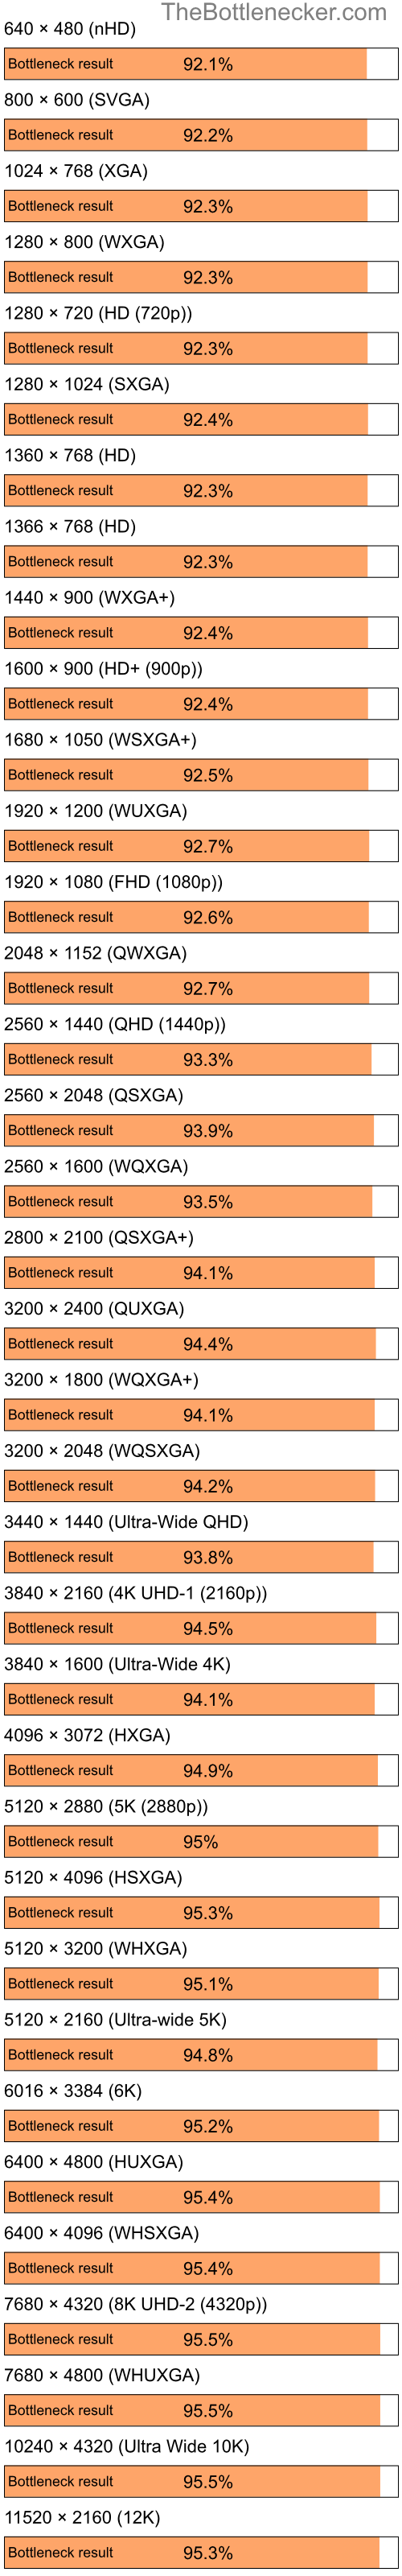 Bottleneck results by resolution for Intel Pentium 4 and AMD Radeon 7000 in7 Days to Die